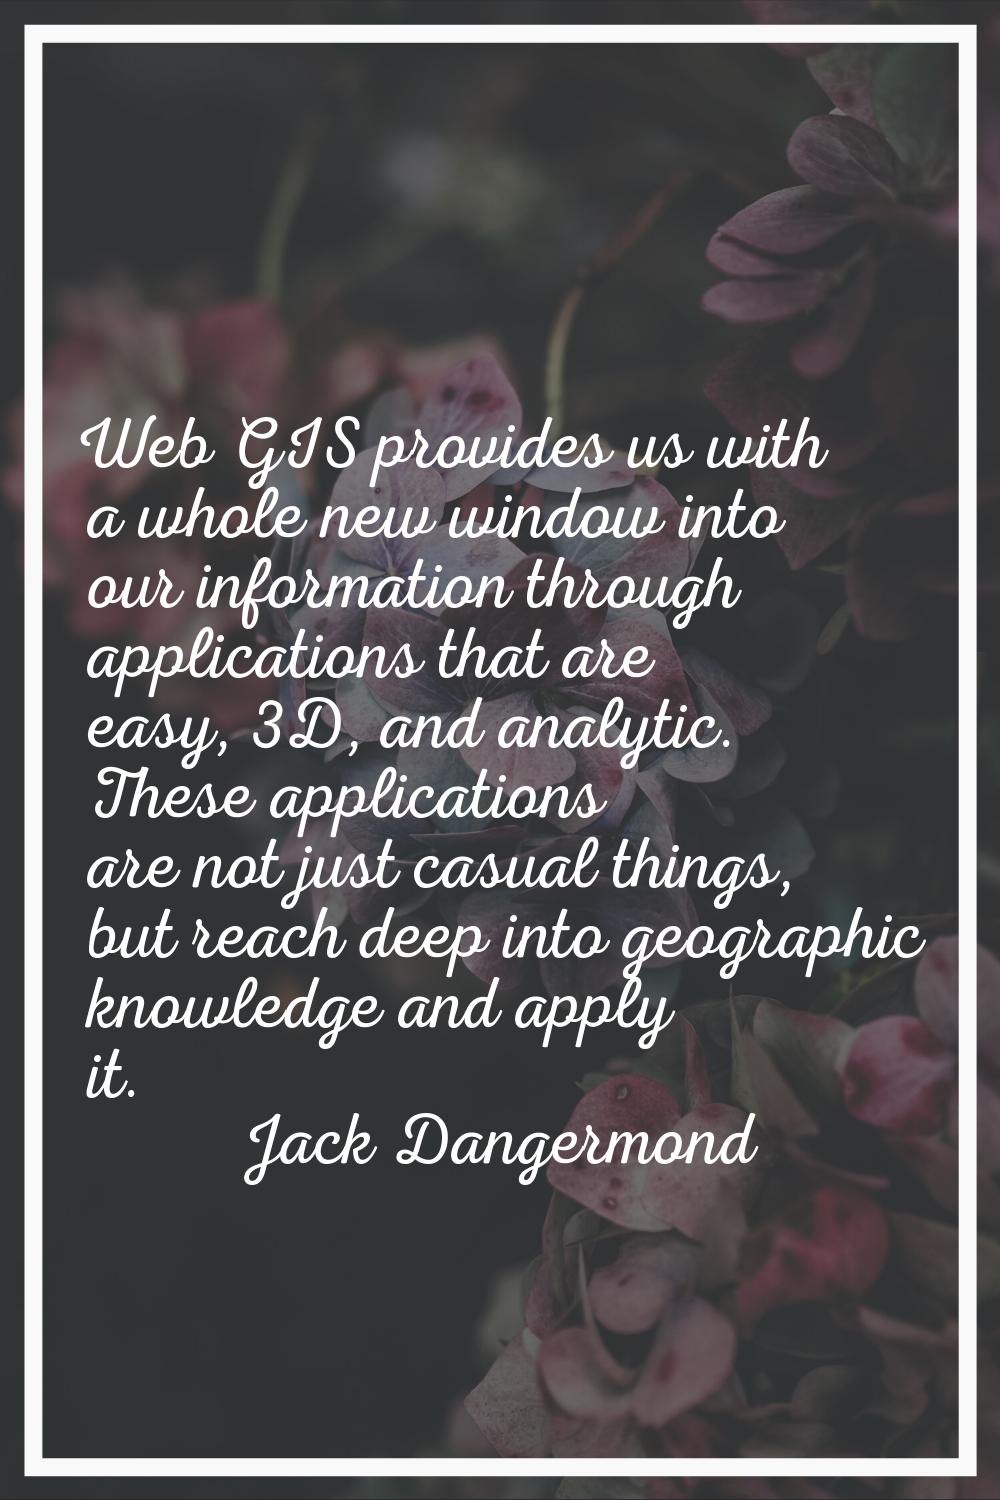 Web GIS provides us with a whole new window into our information through applications that are easy